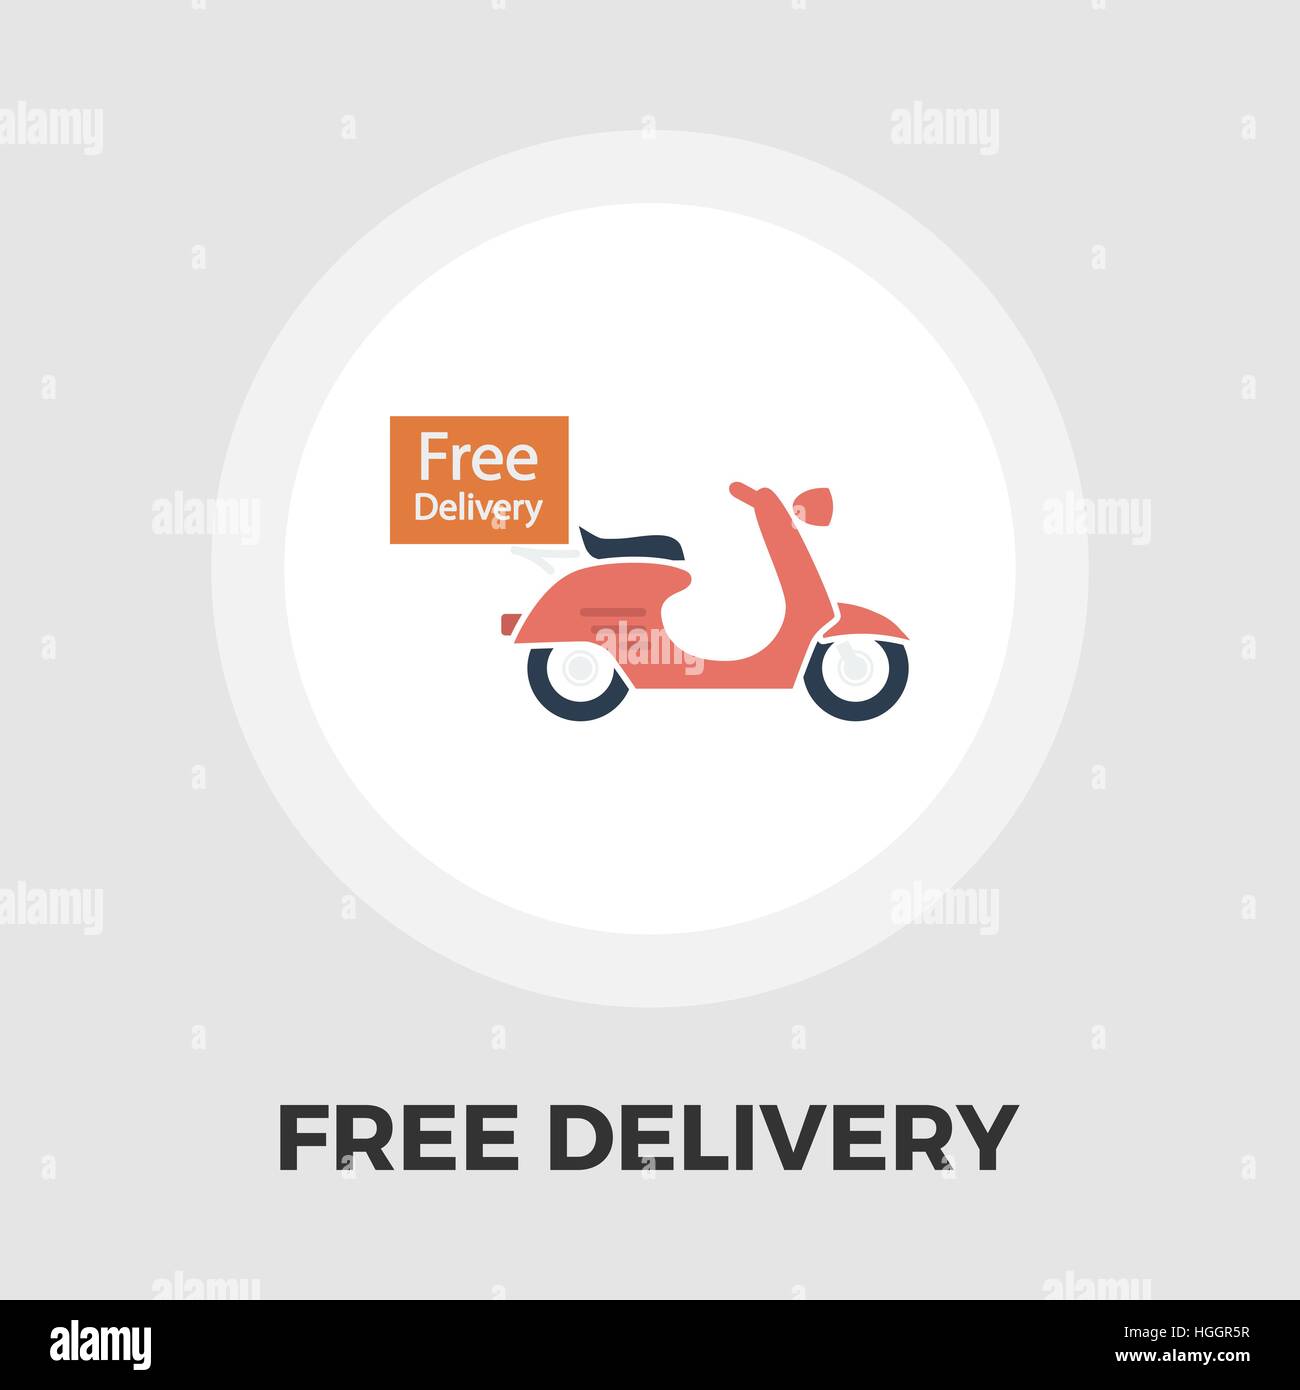 Free Delivery icon vector. Flat icon isolated on the white background. Editable EPS file. Vector illustration. Stock Vector